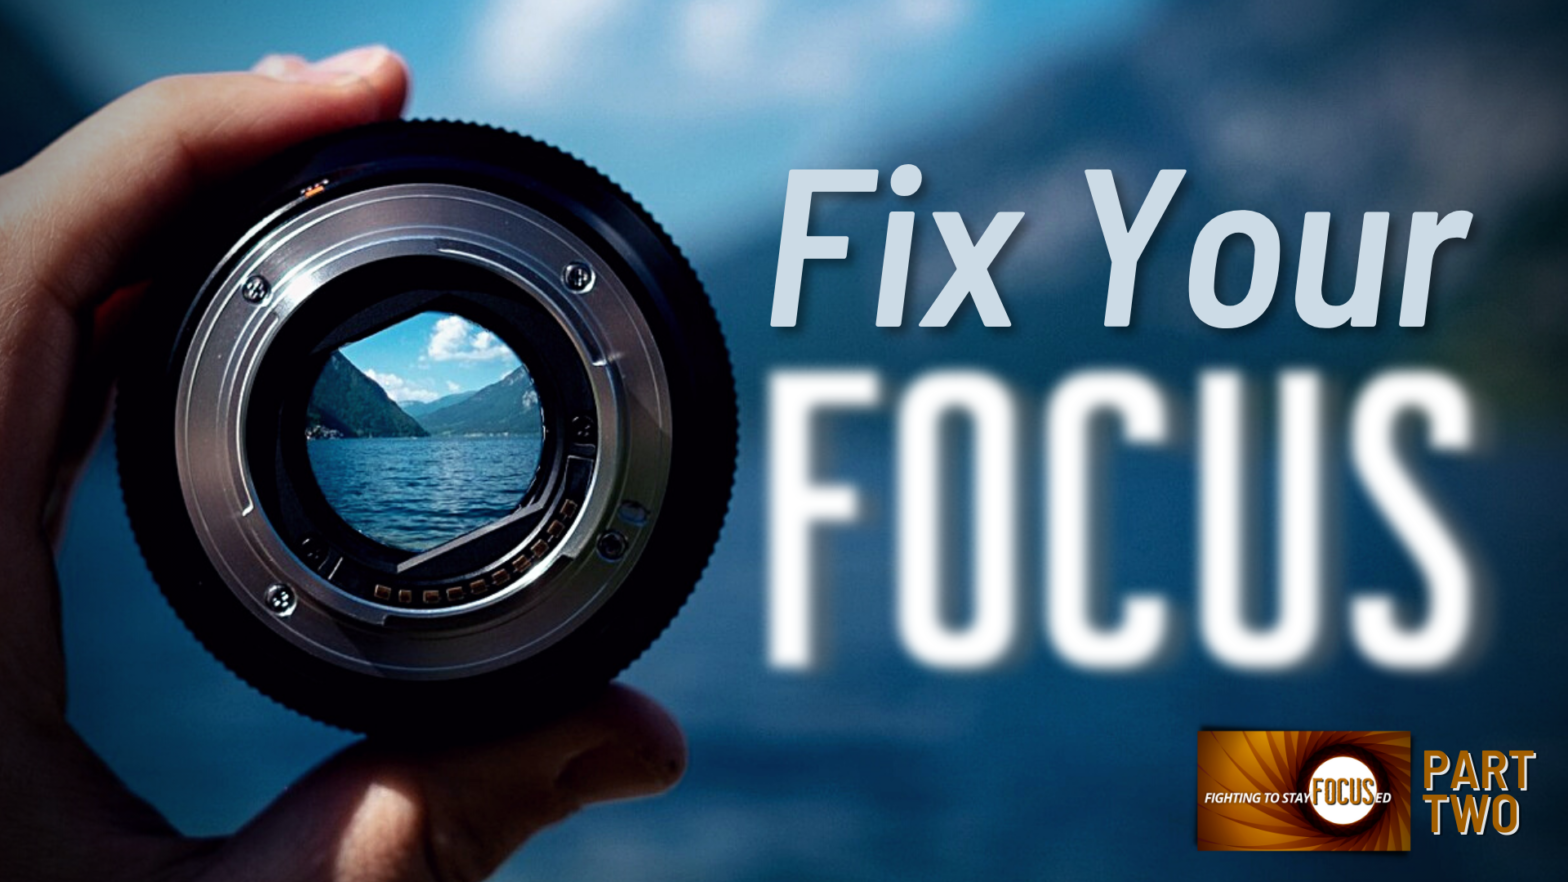 Fighting To Stay Focused II: Fix Your Focus